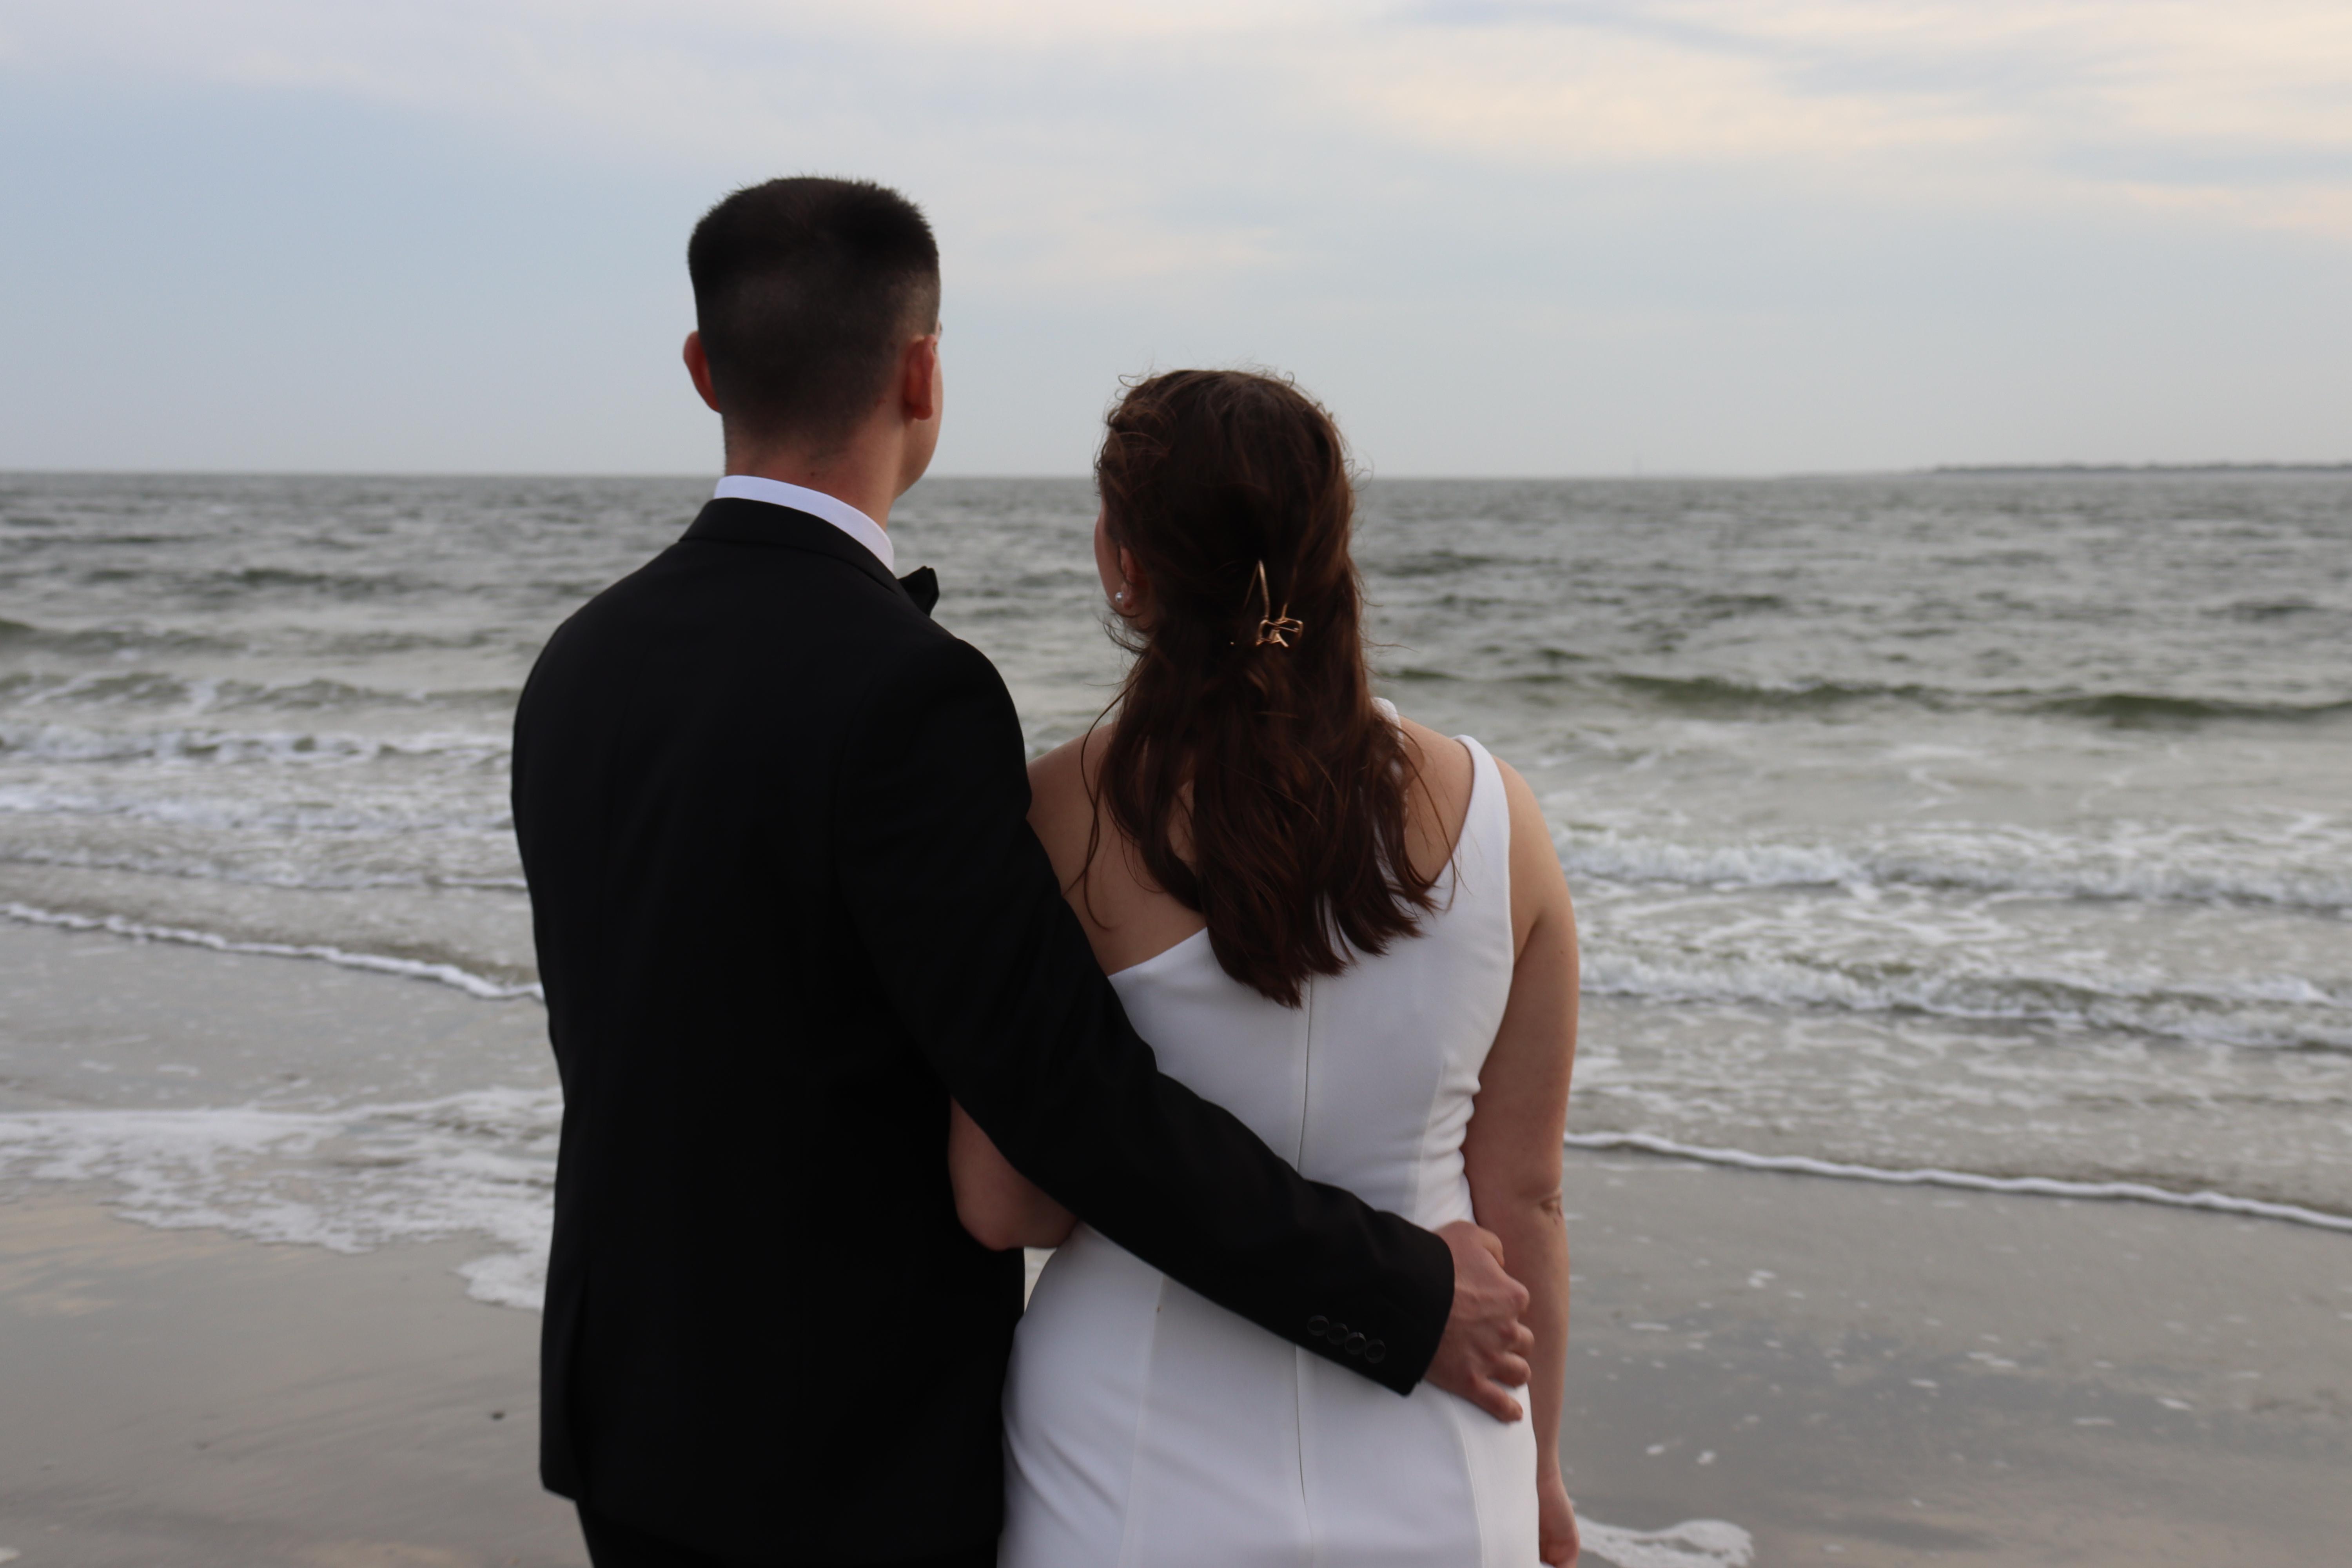 The Wedding Website of Mallory Dryden and Noah Metzger